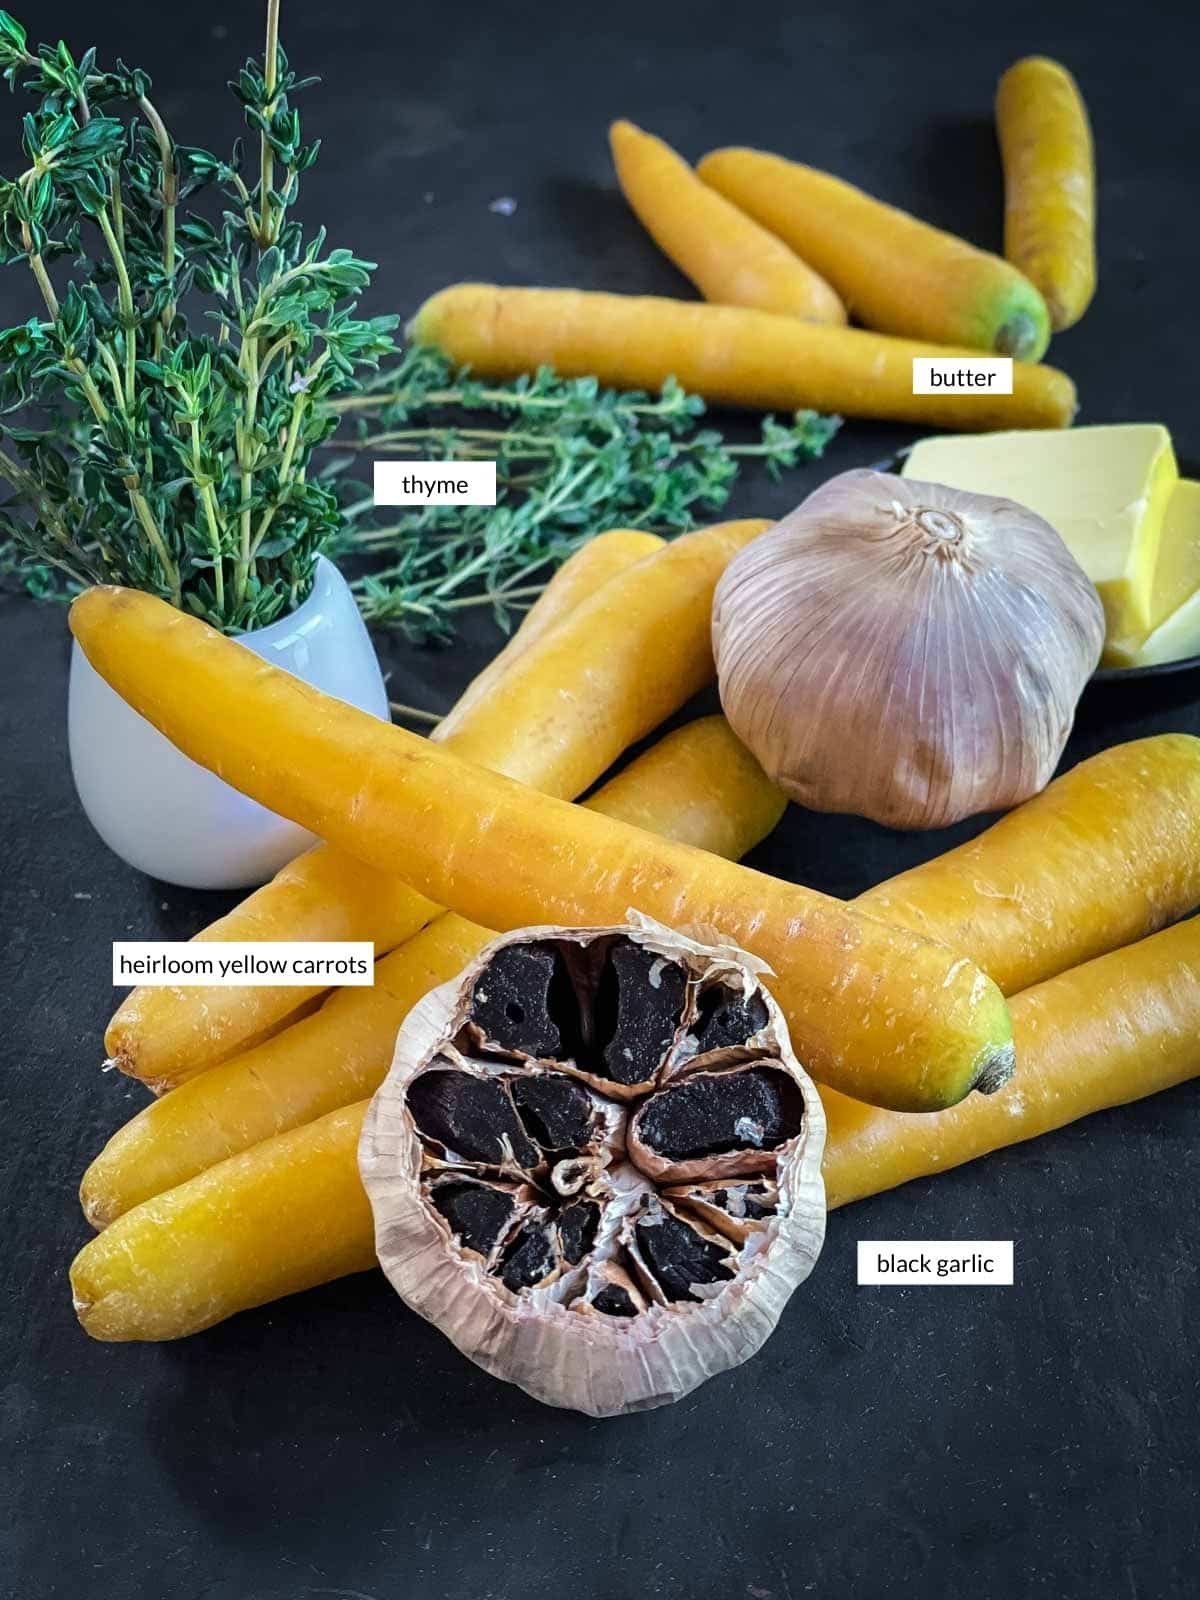 Individually labelled ingredients for Roasted Yellow Carrots with Black Garlic